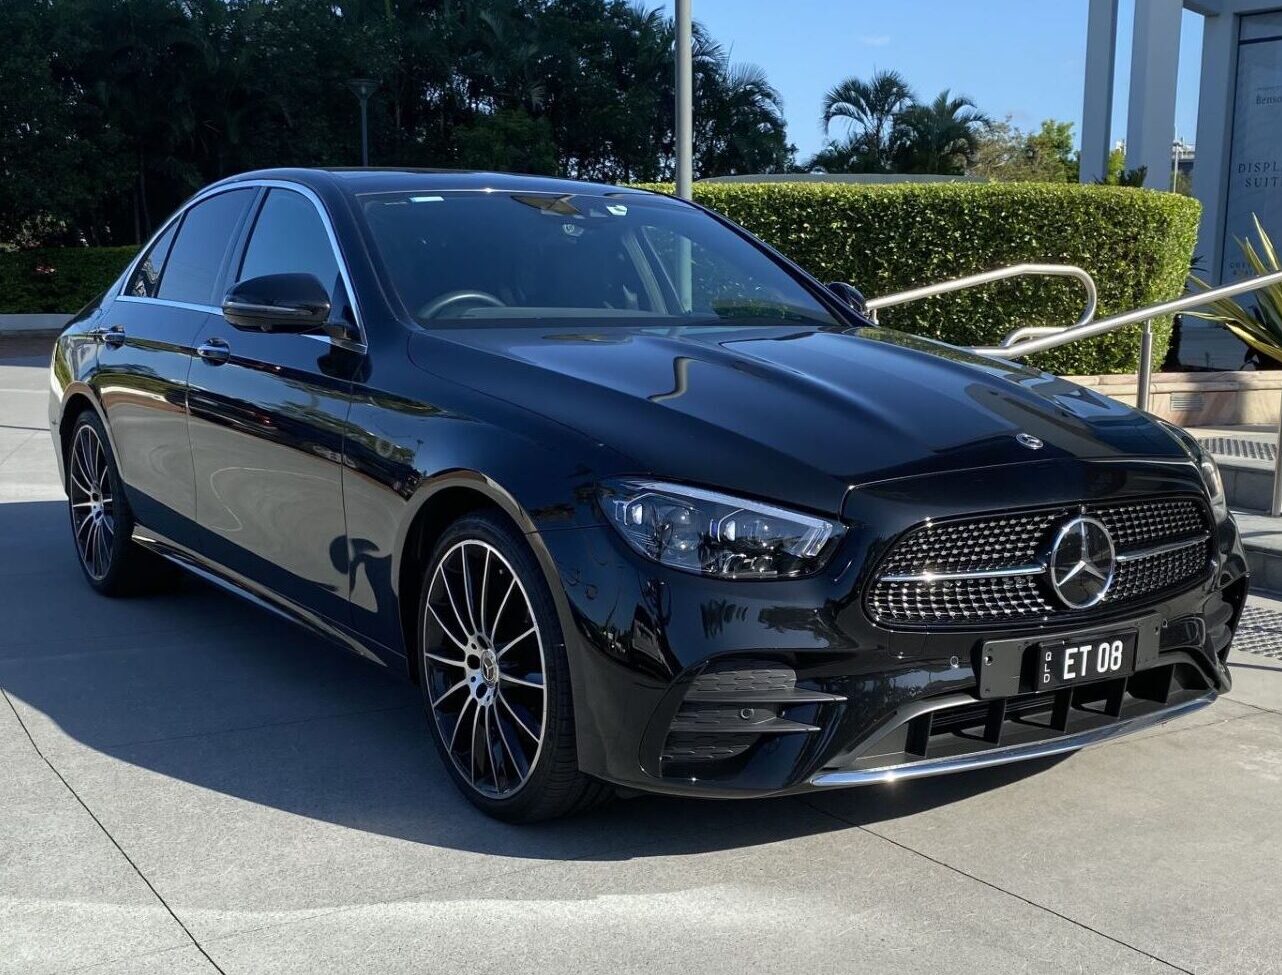 mercedes-e-class-parked-after-gold-coast-airport-transfers